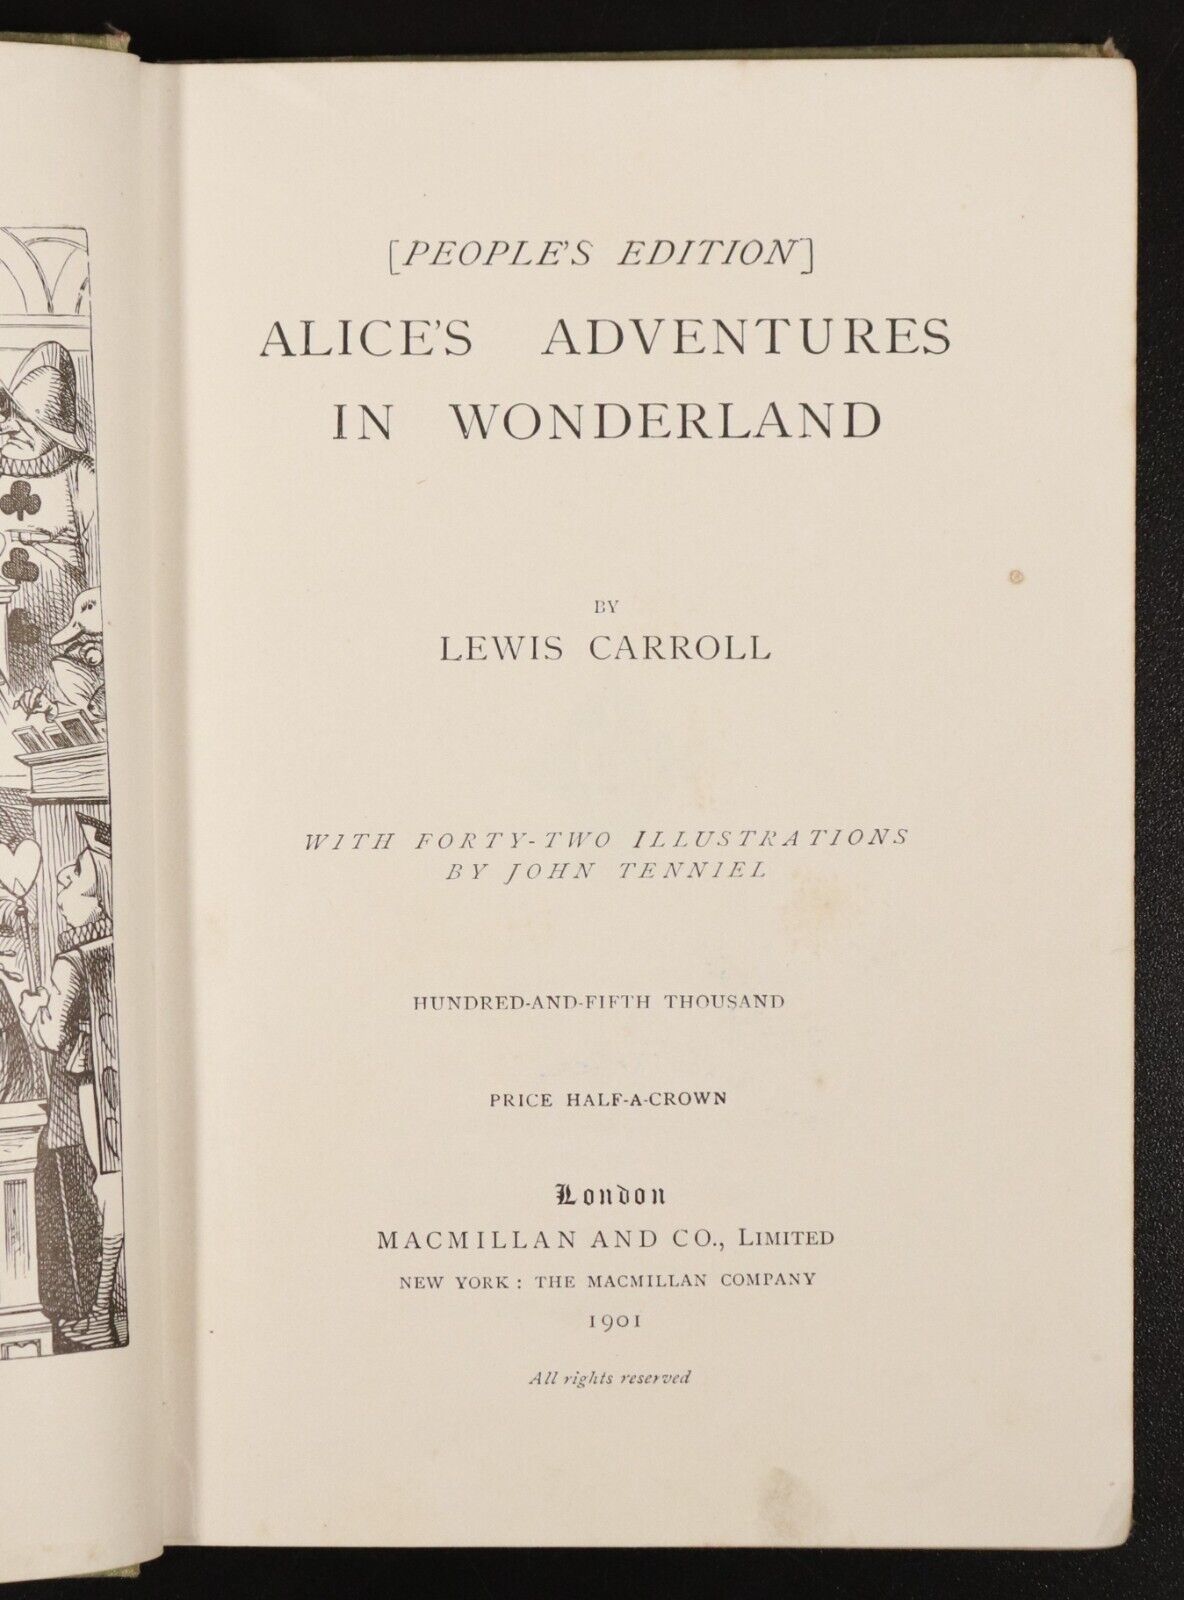 1901 Alice's Adventures In Wonderland by Lewis Carroll Antique Fiction Book - 0